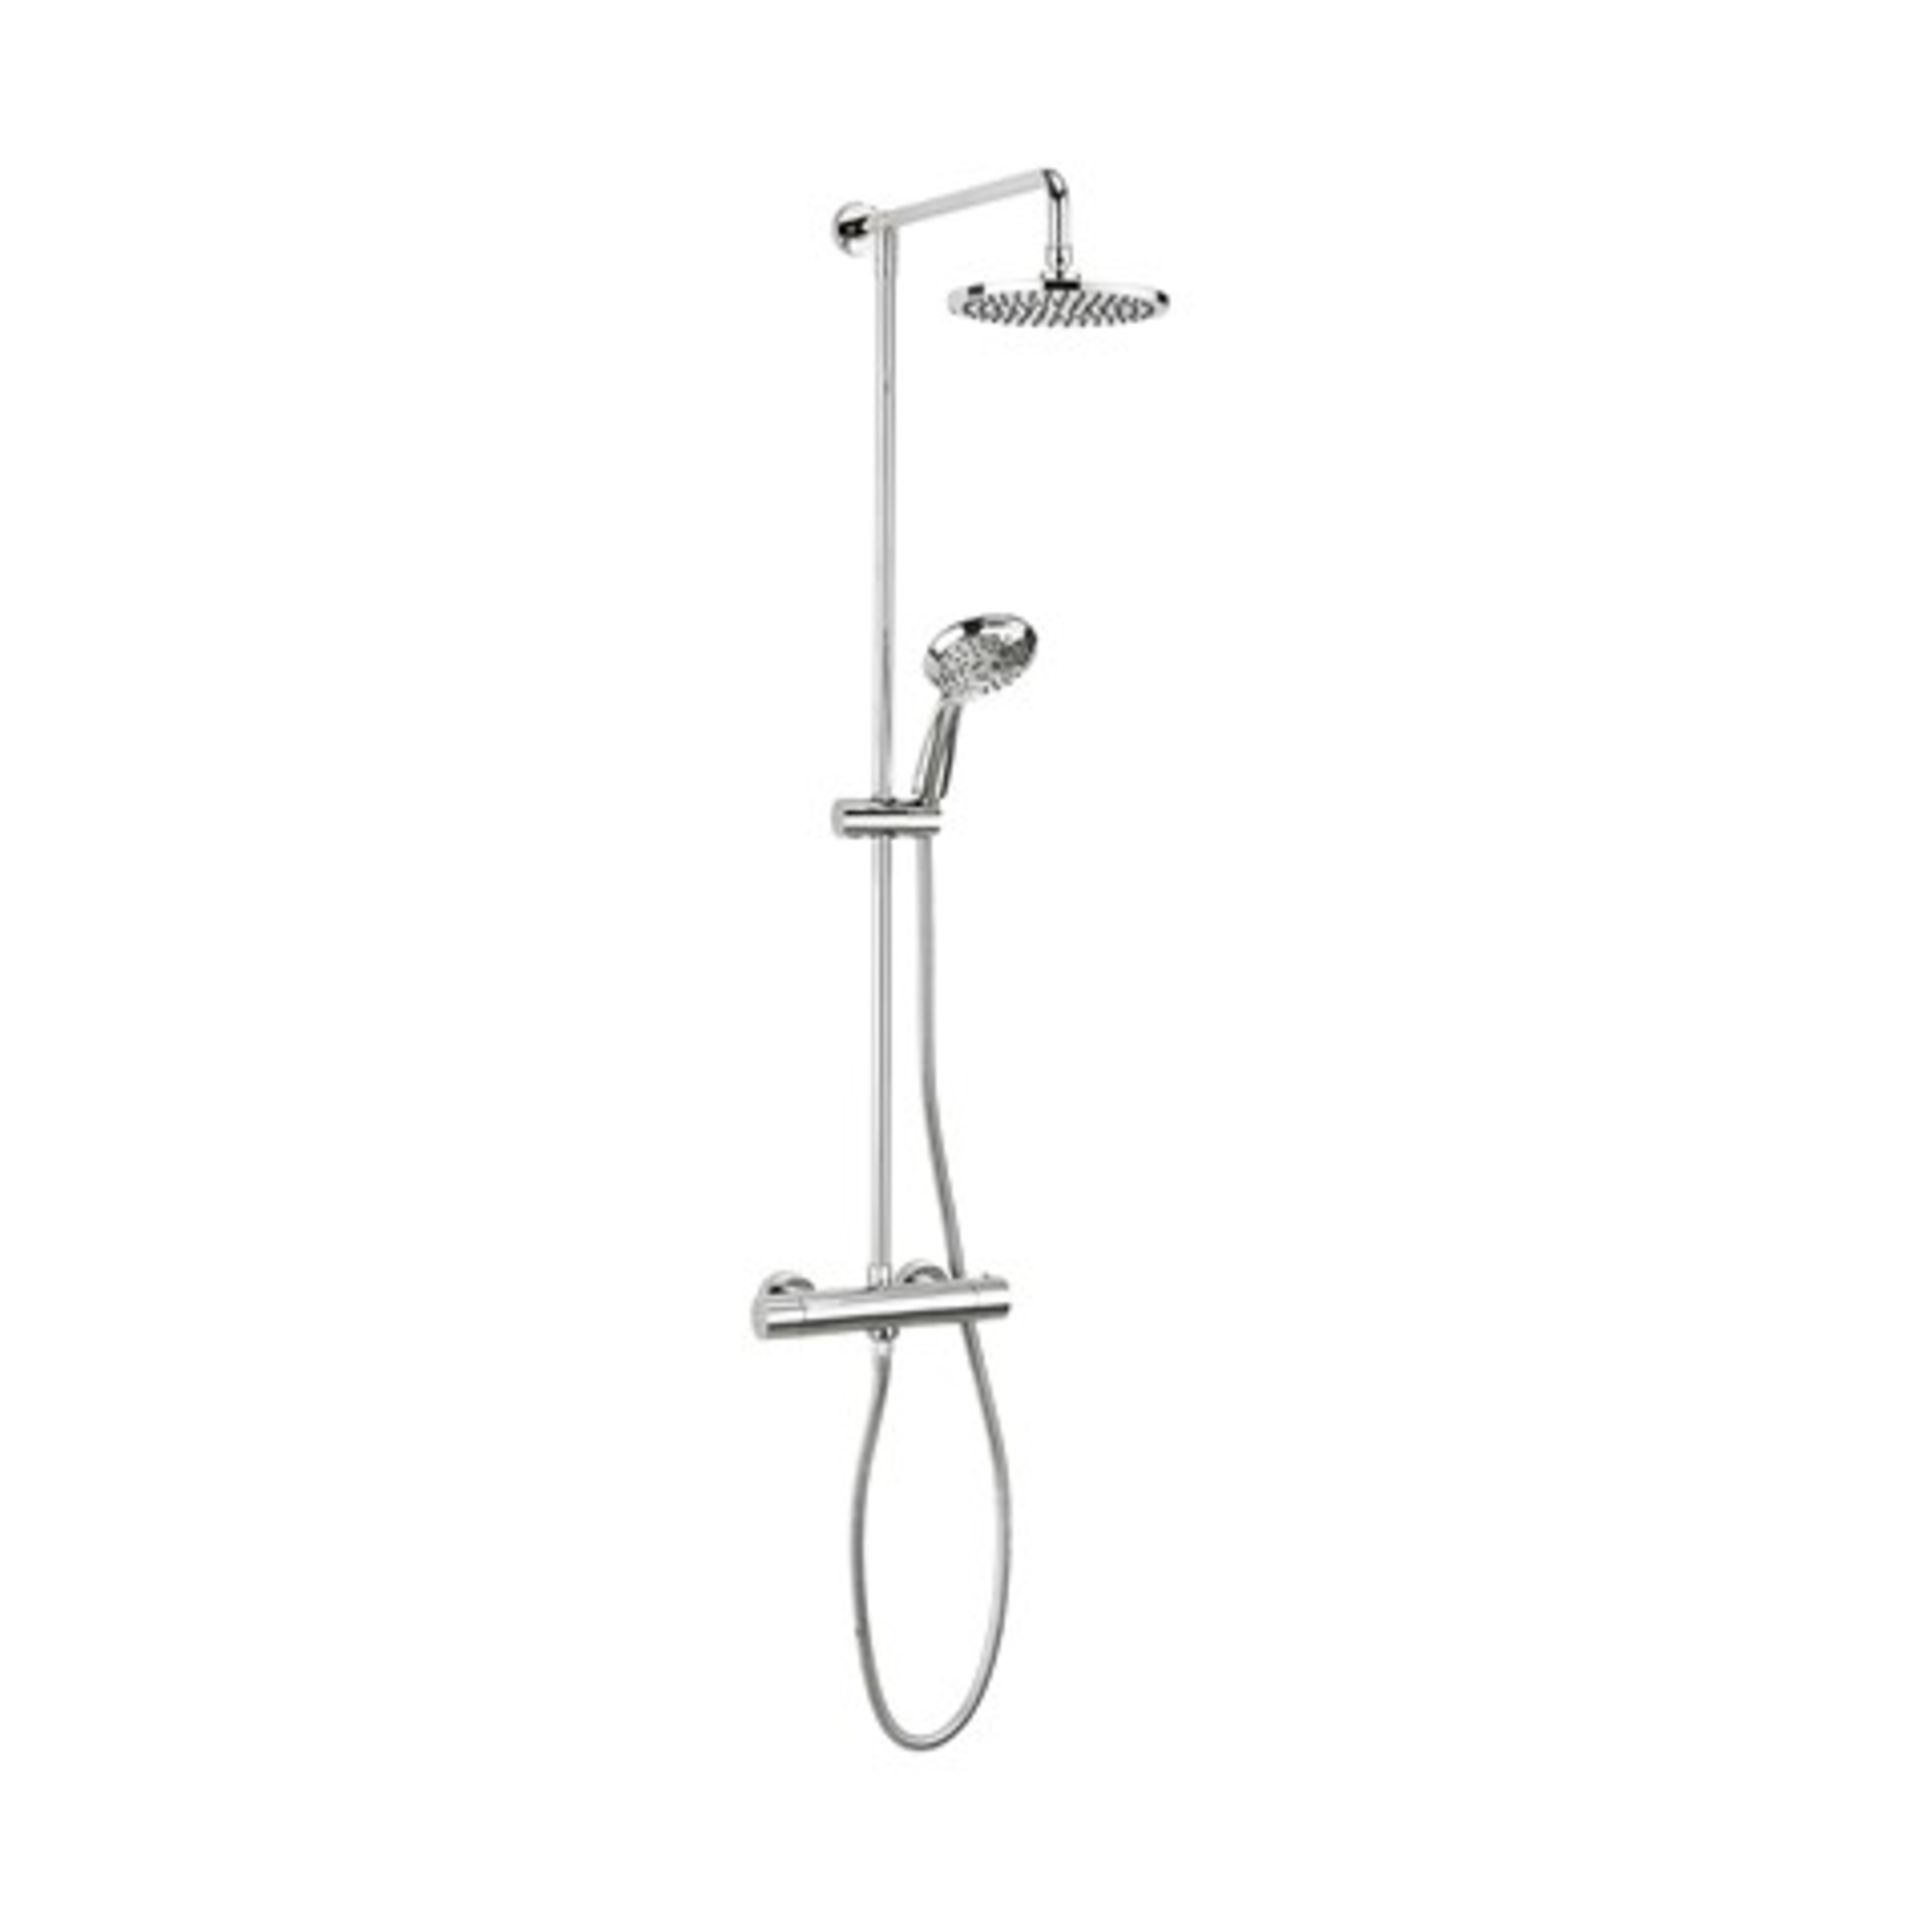 Fusion Multifunction Thermostatic Shower Valve with Fixed Head & Three Mode Shower Kit - Image 3 of 9